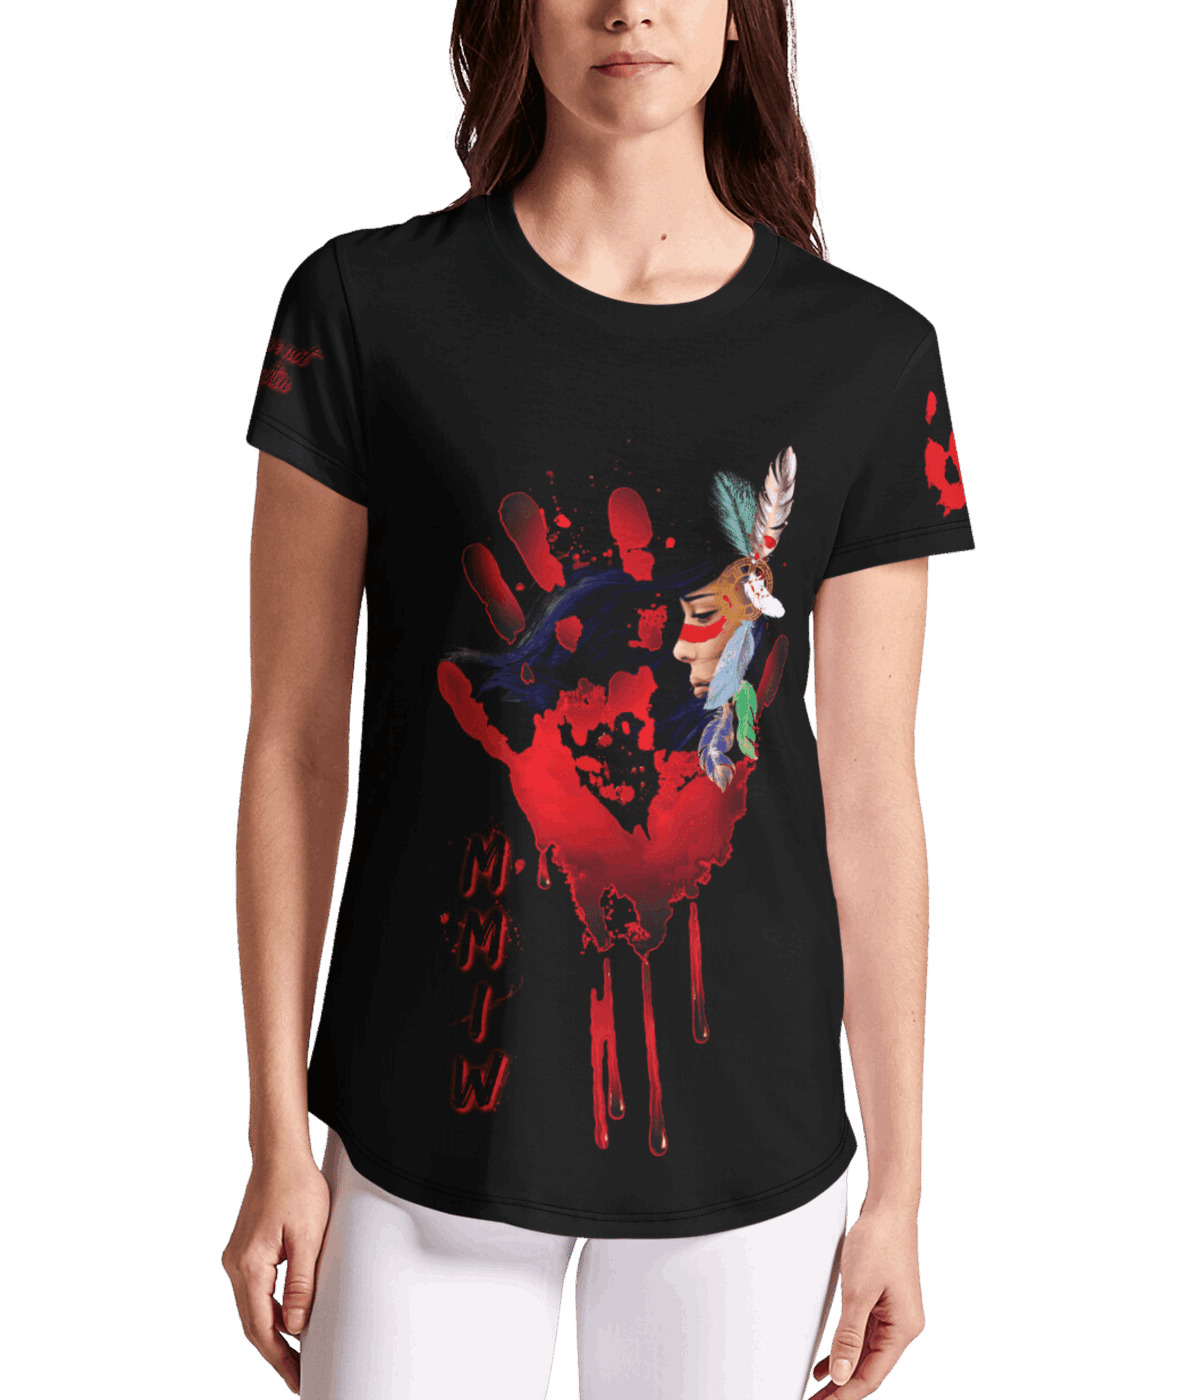 Murdered and Missing Indigenous Women’s (MMIW) Women's Crew Tee